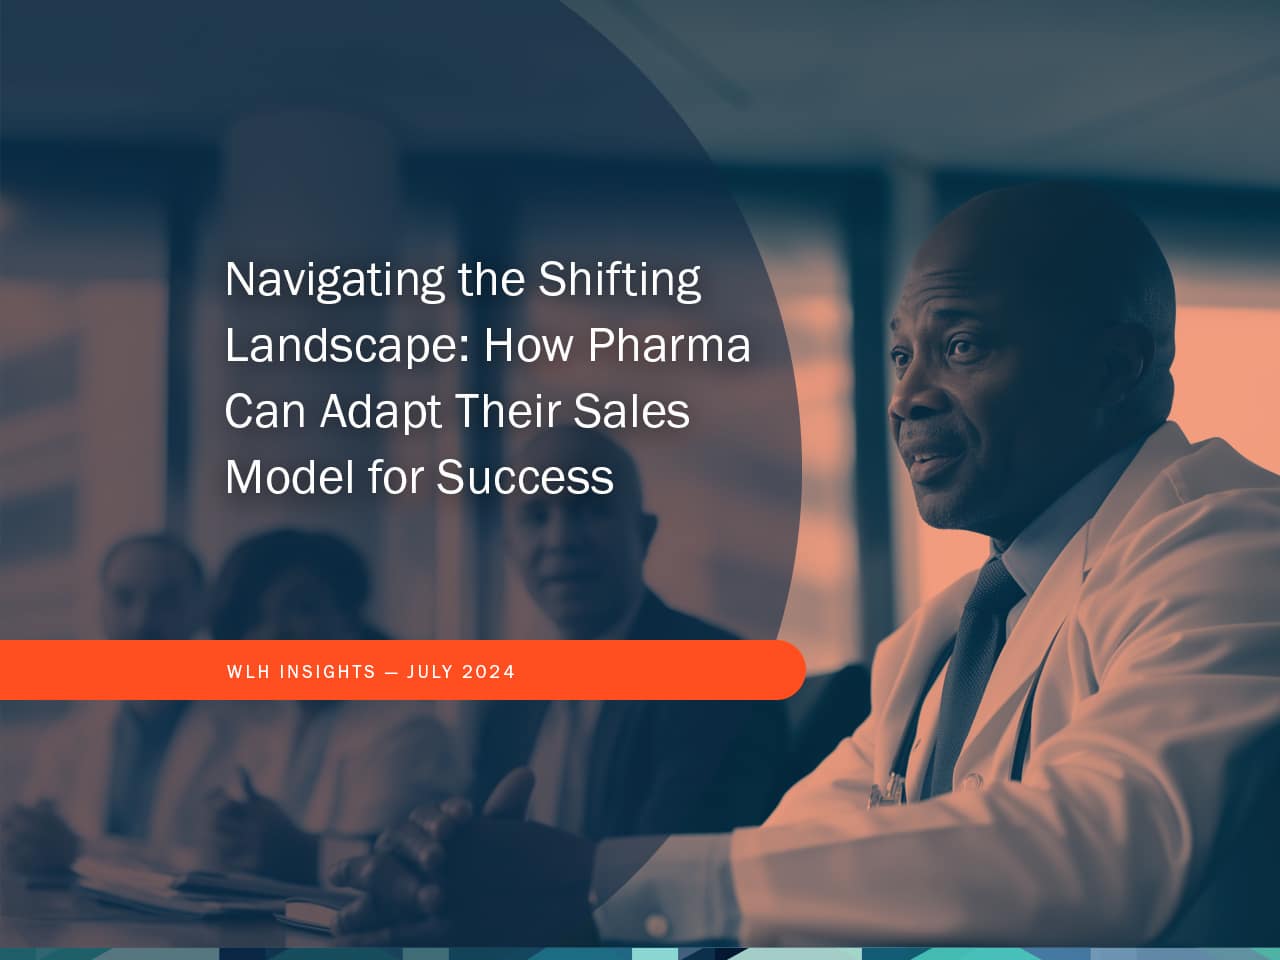 Navigating the Shifting Landscape: How Pharma Can Adapt Their Sales Model for Success